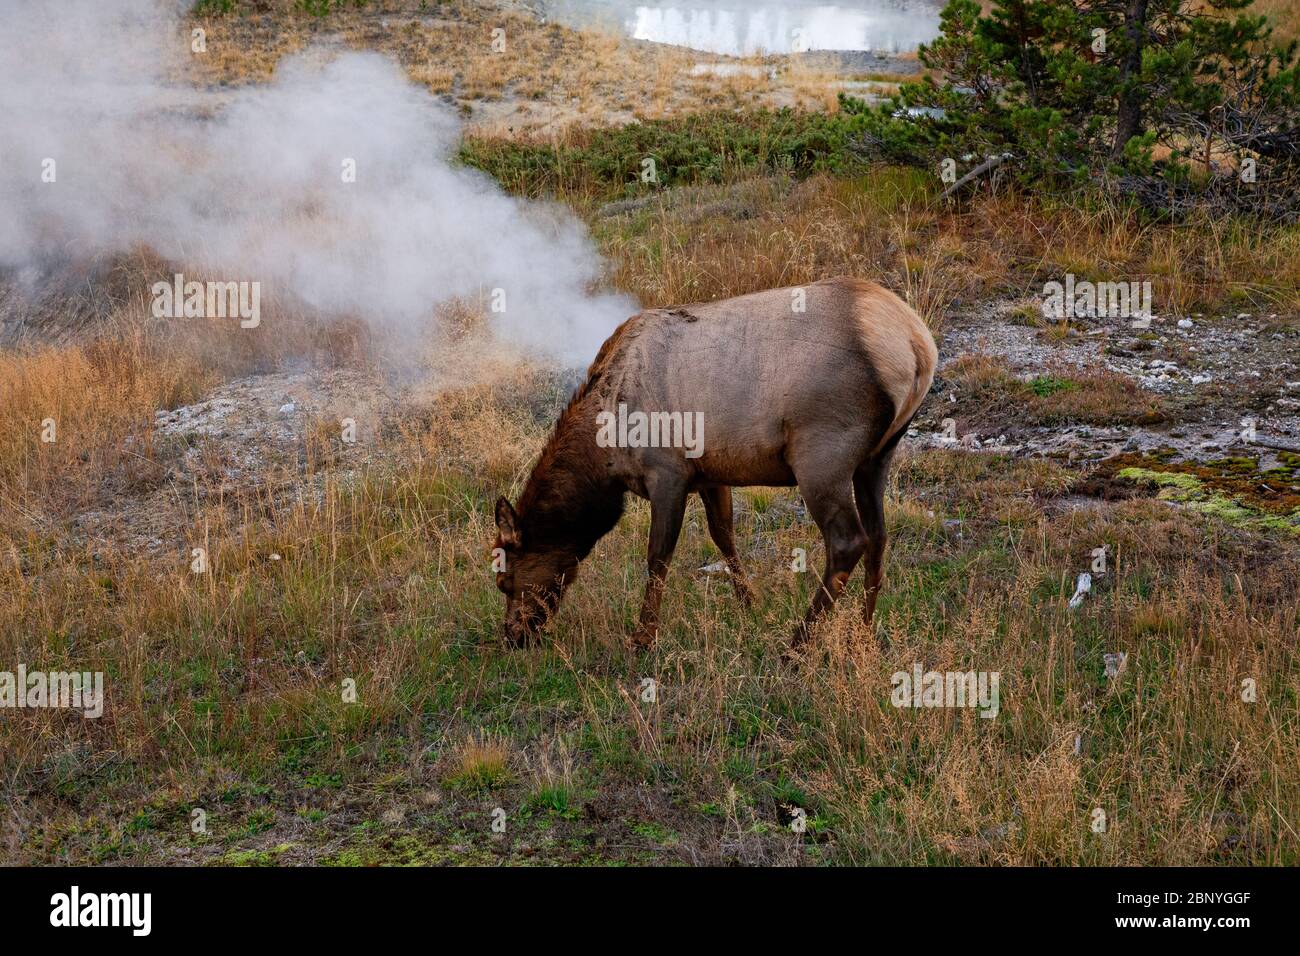 WY04378-00...WYOMING - A elk grazing among the hot springs at the West Thumb Thermal area in Yellowstone National Park. Stock Photo